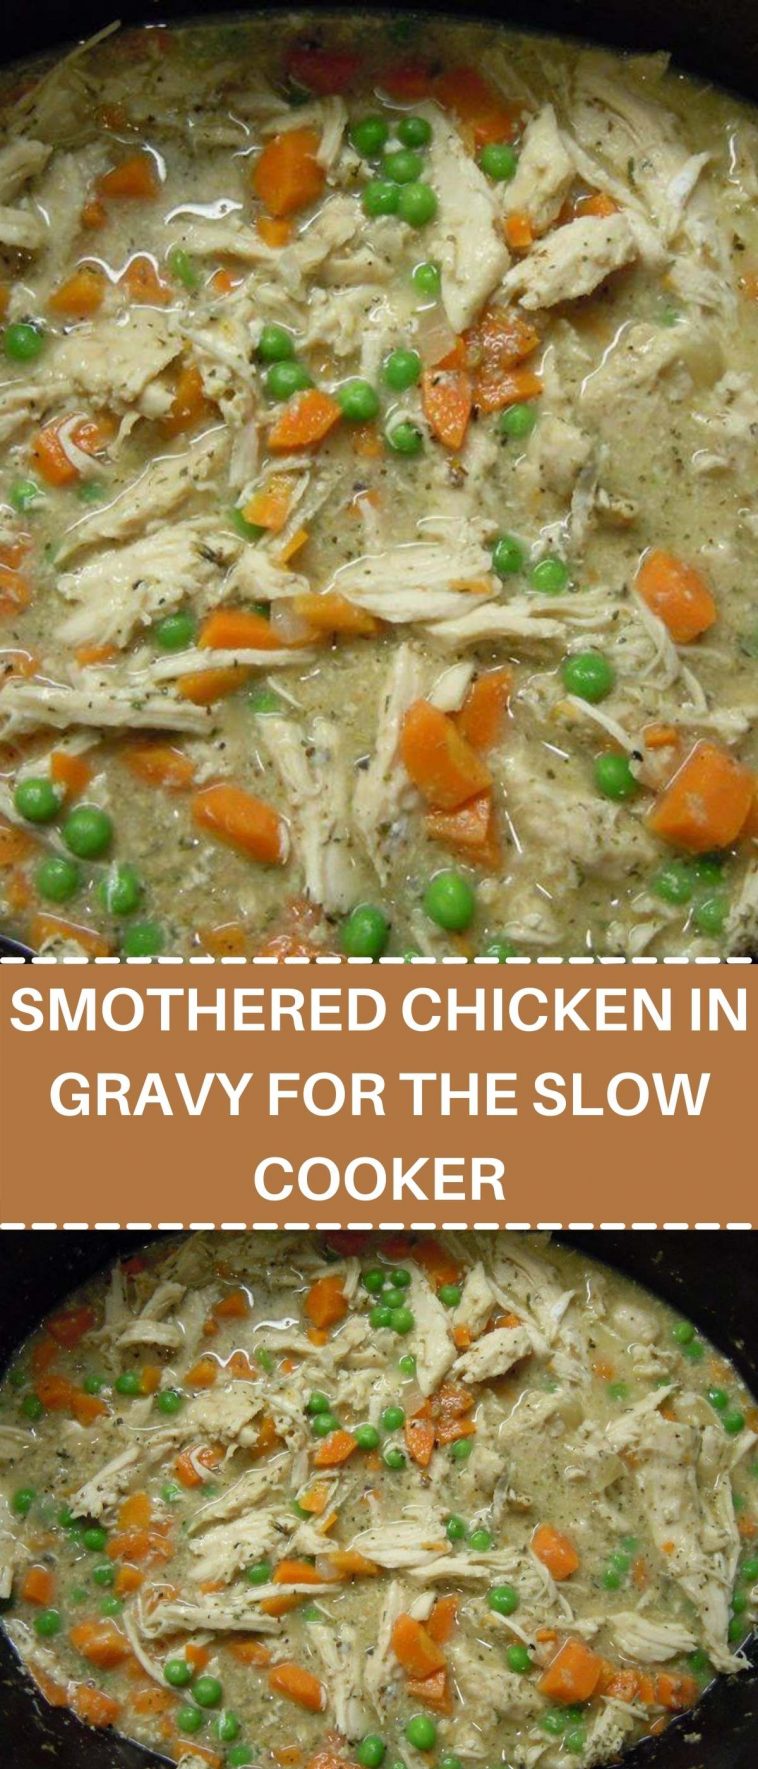 SMOTHERED CHICKEN IN GRAVY FOR THE SLOW COOKER